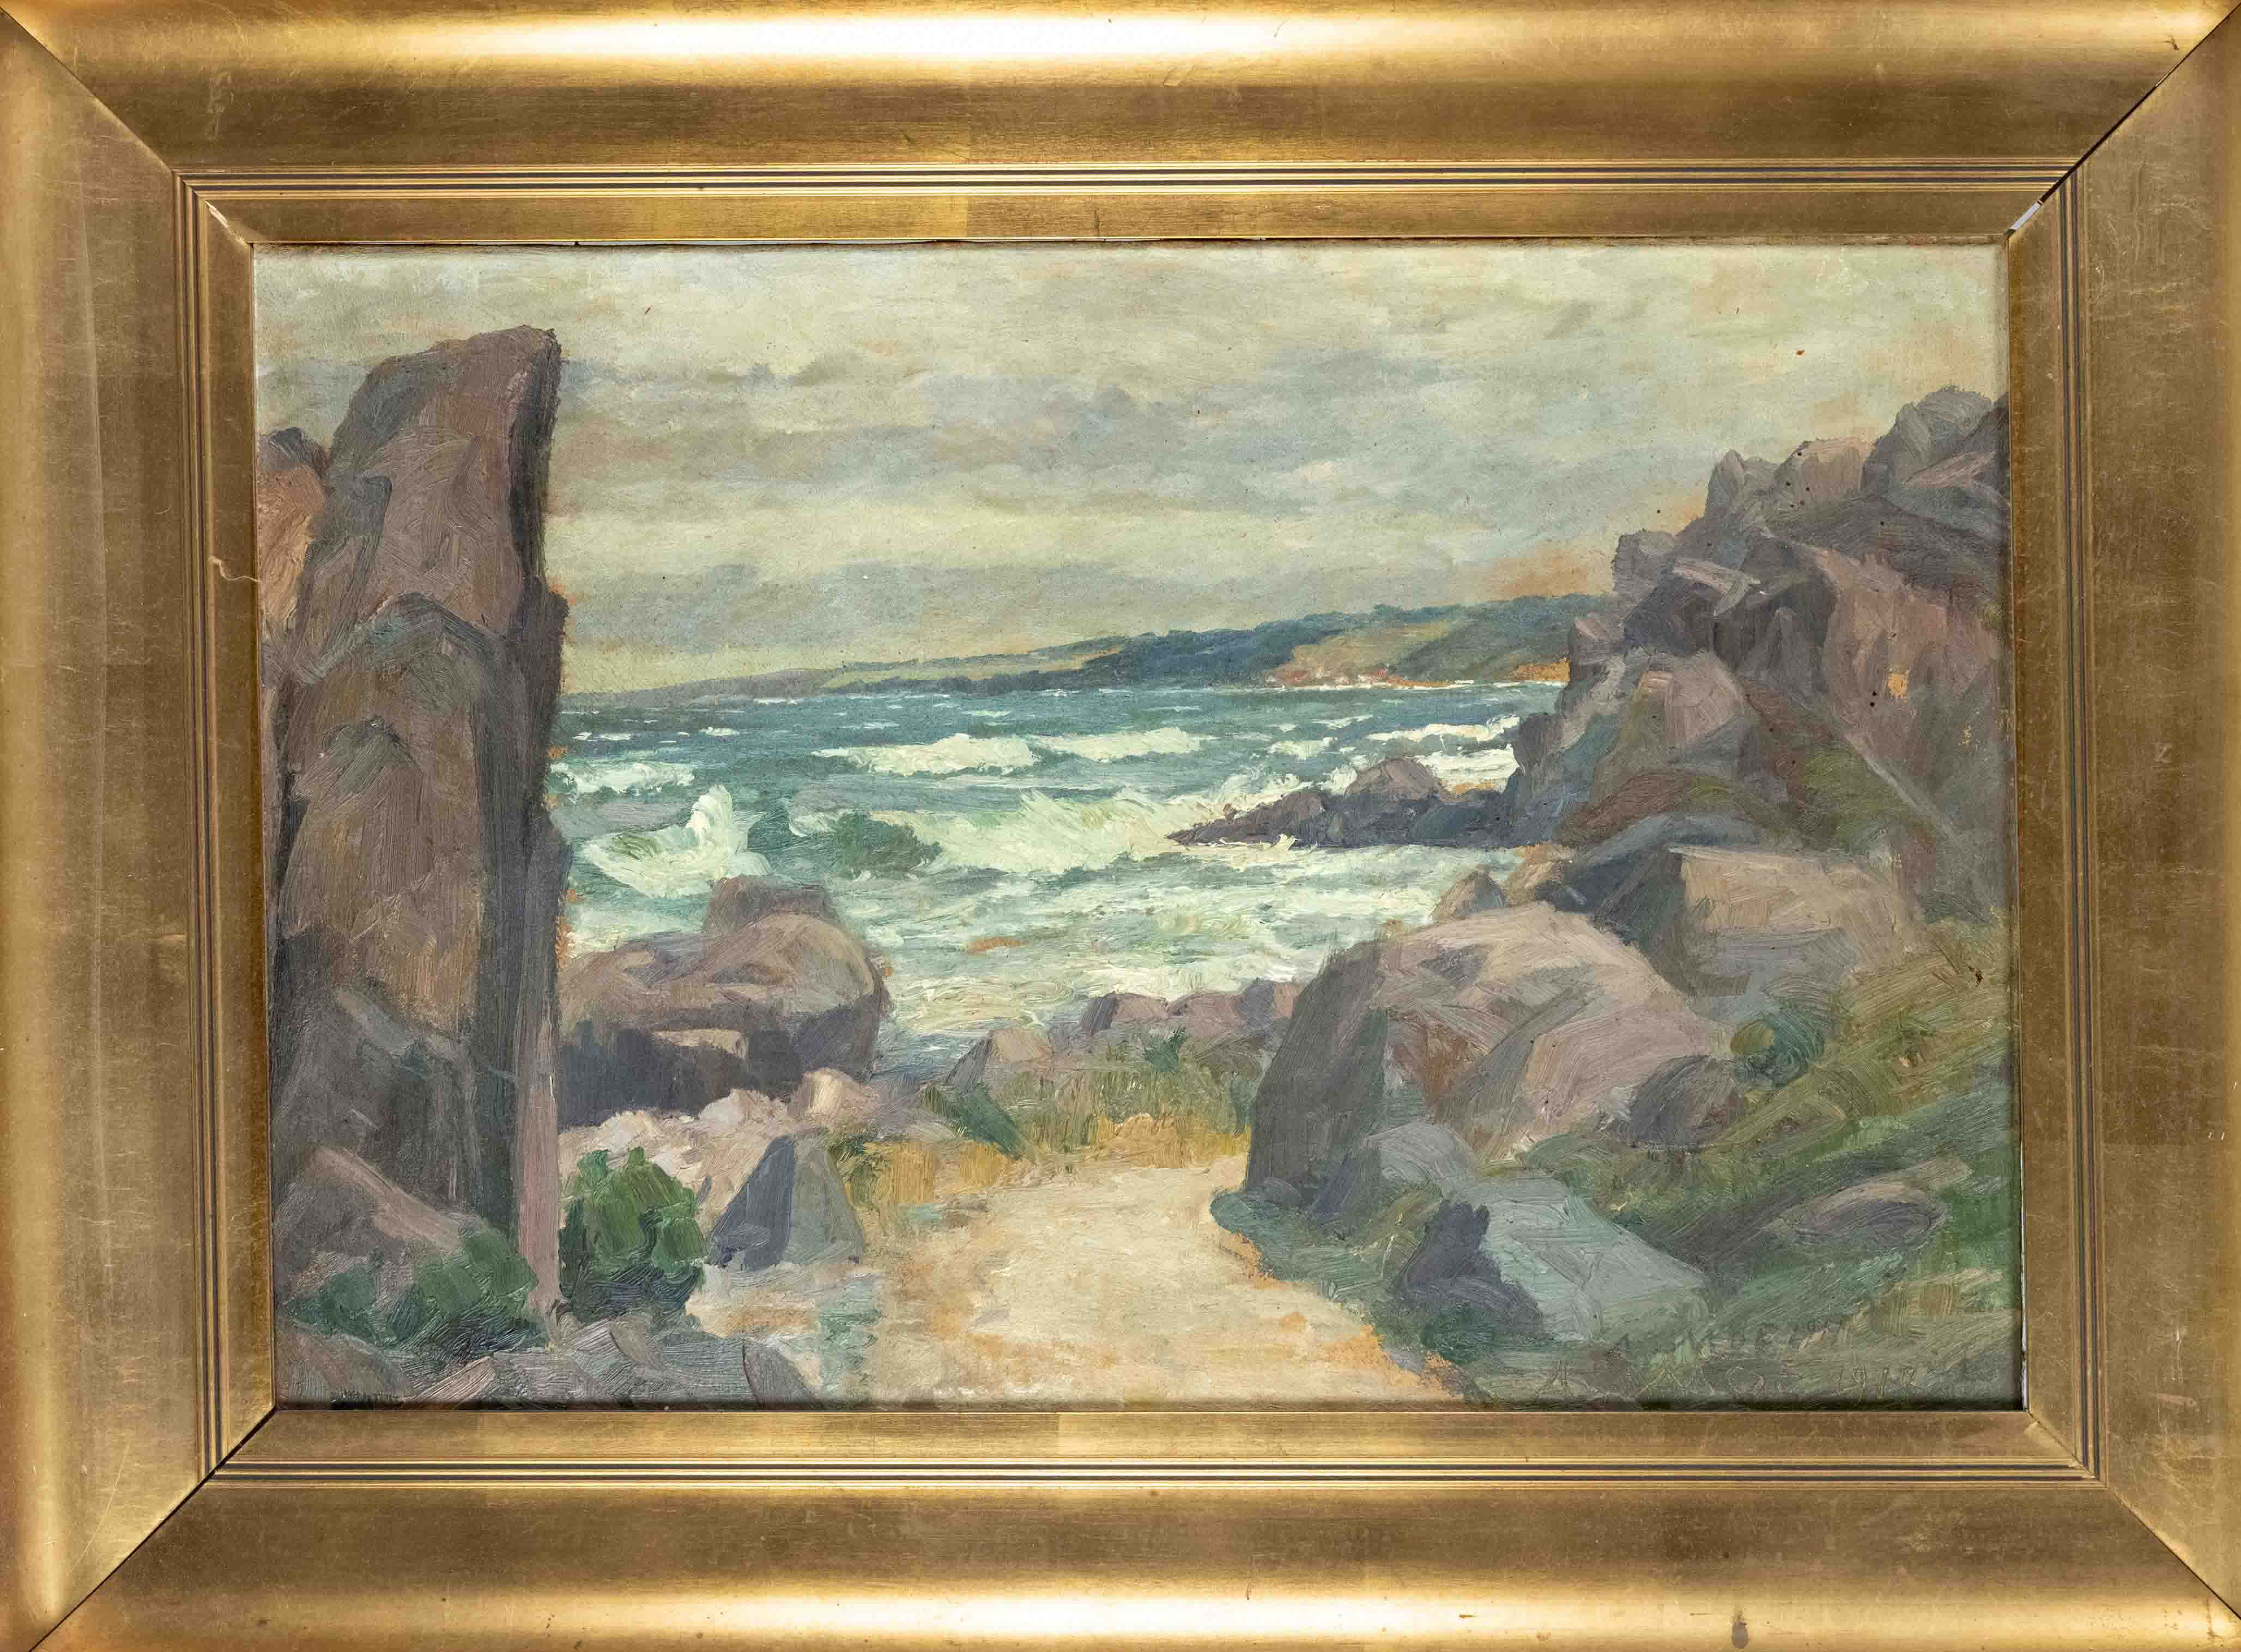 Andreas Moe (1877-1952), Sea surf on rocky coast, oil on canvas, signed & dated 1917 lower right, 45